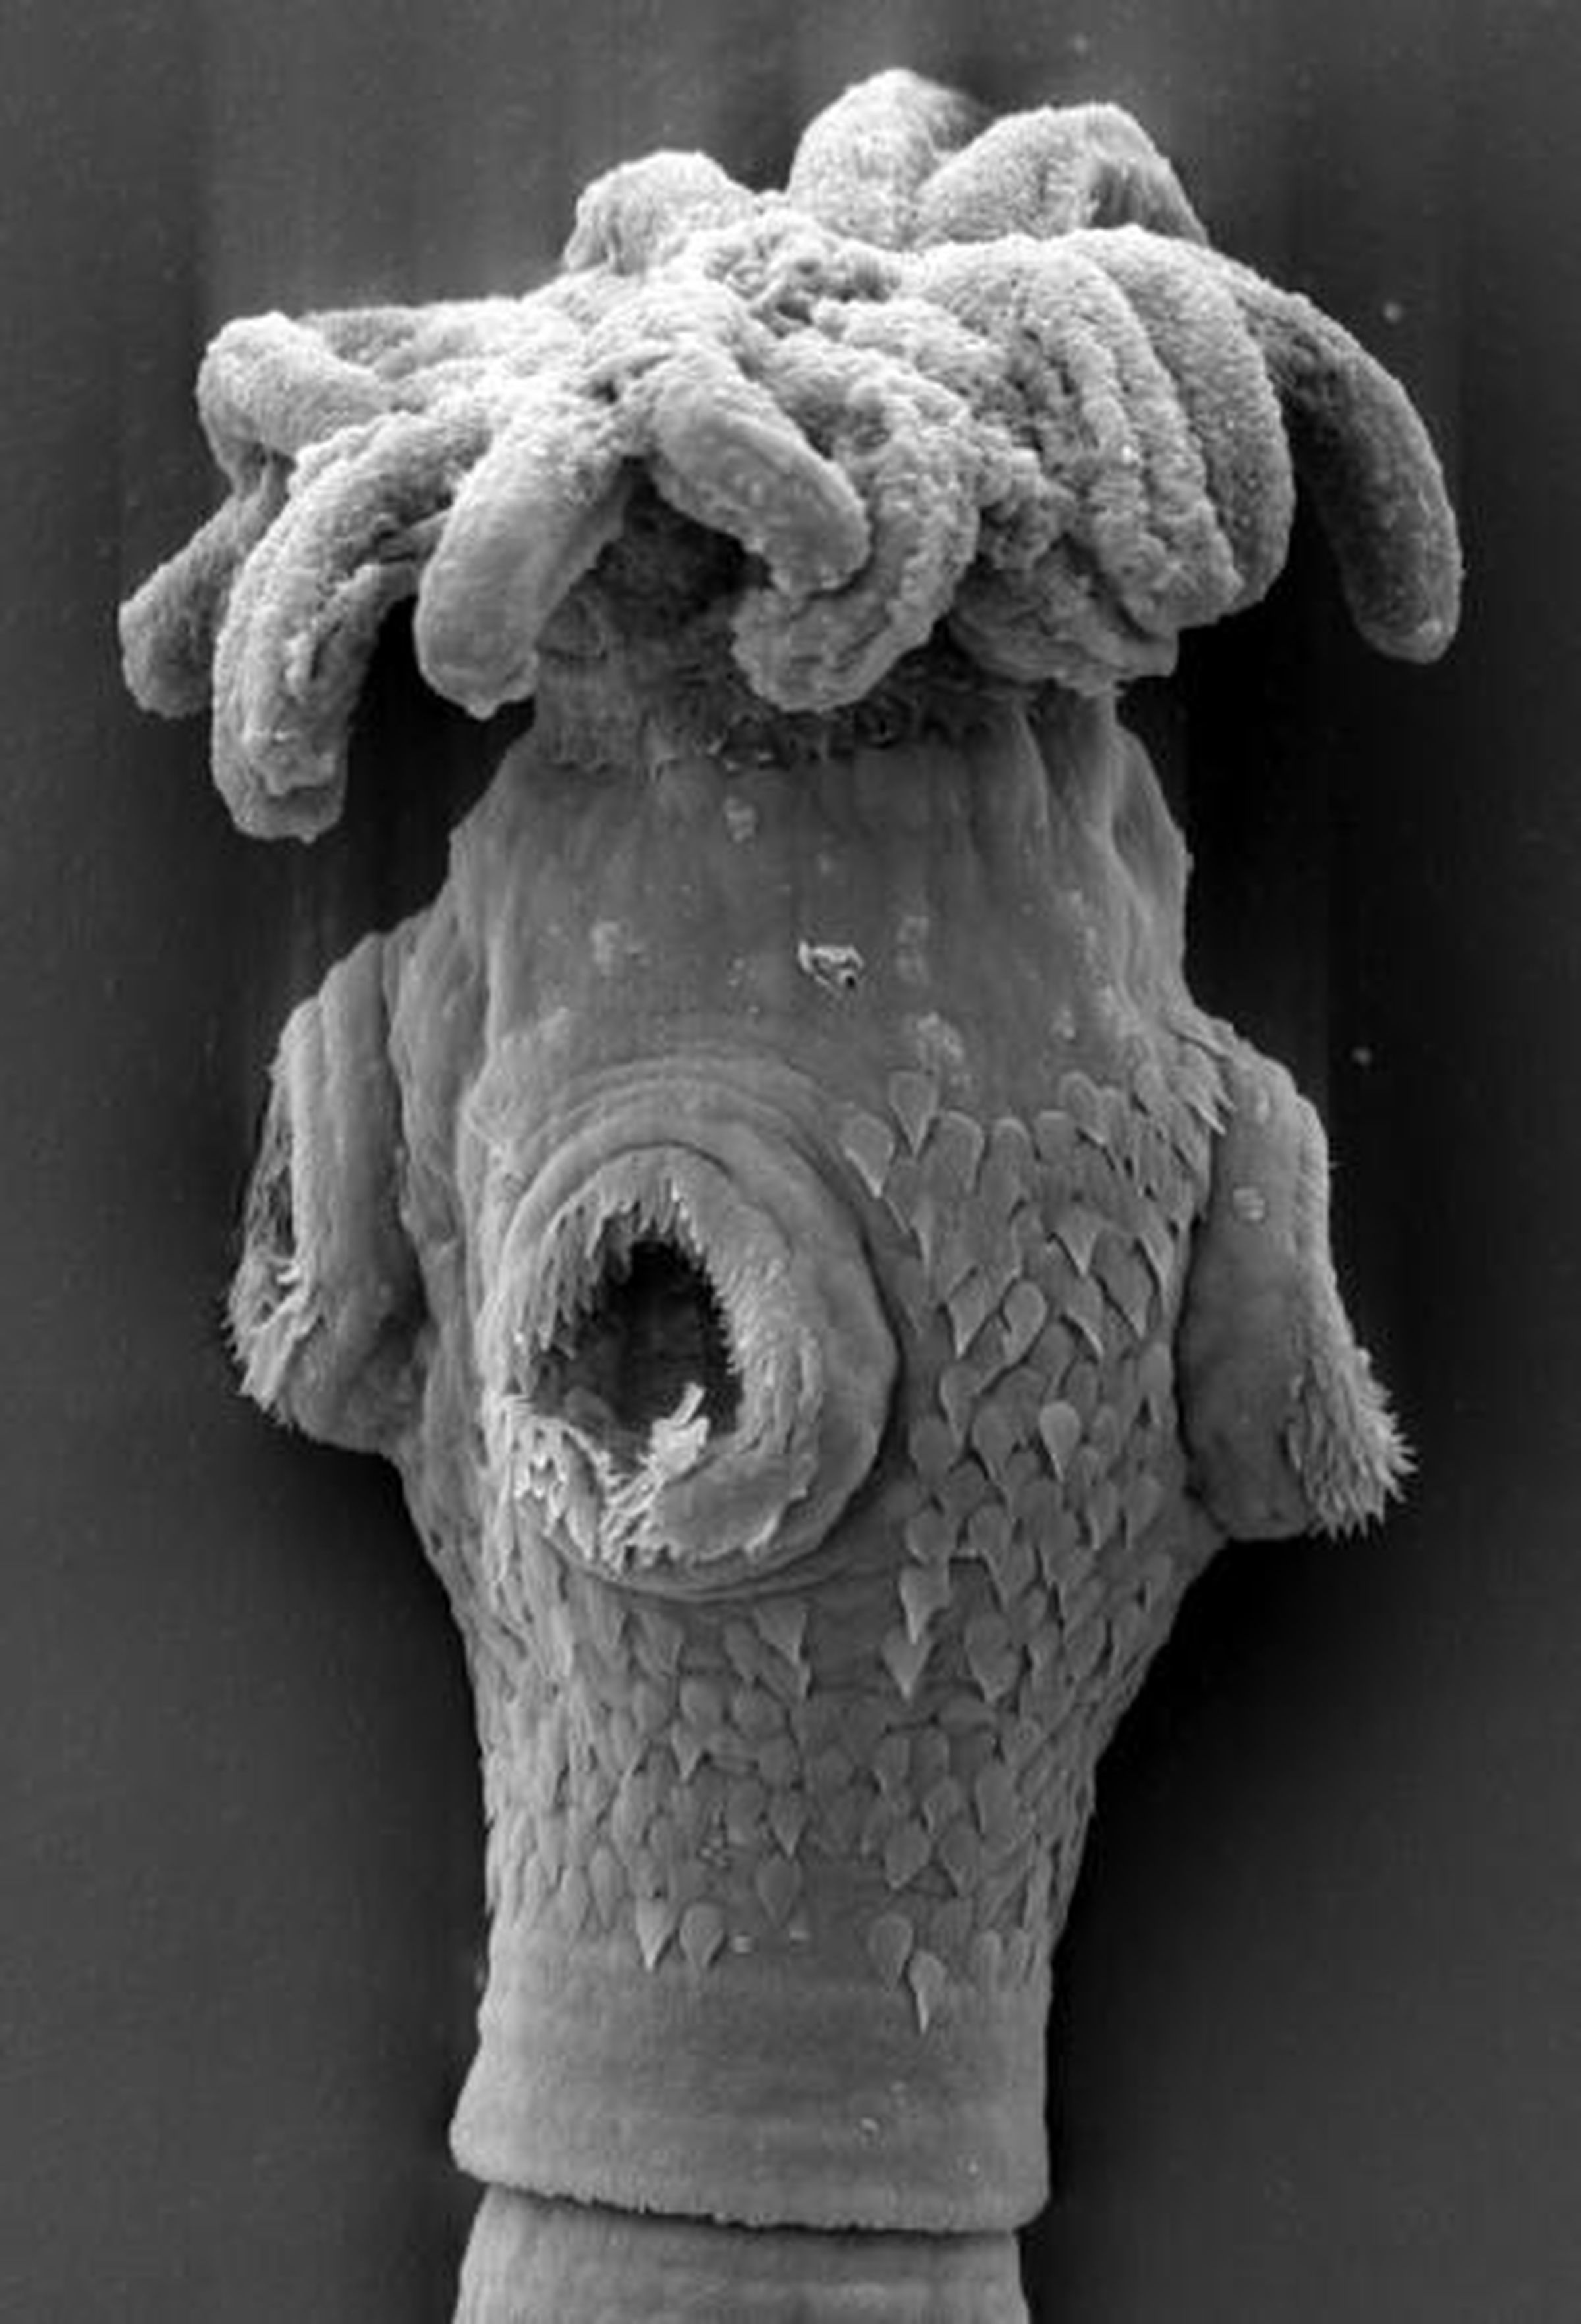 This is the part of a tapeworm that latches onto its host’s intestine. This particular tapeworm was discovered in a Giant Shovelnose Ray from Australia.